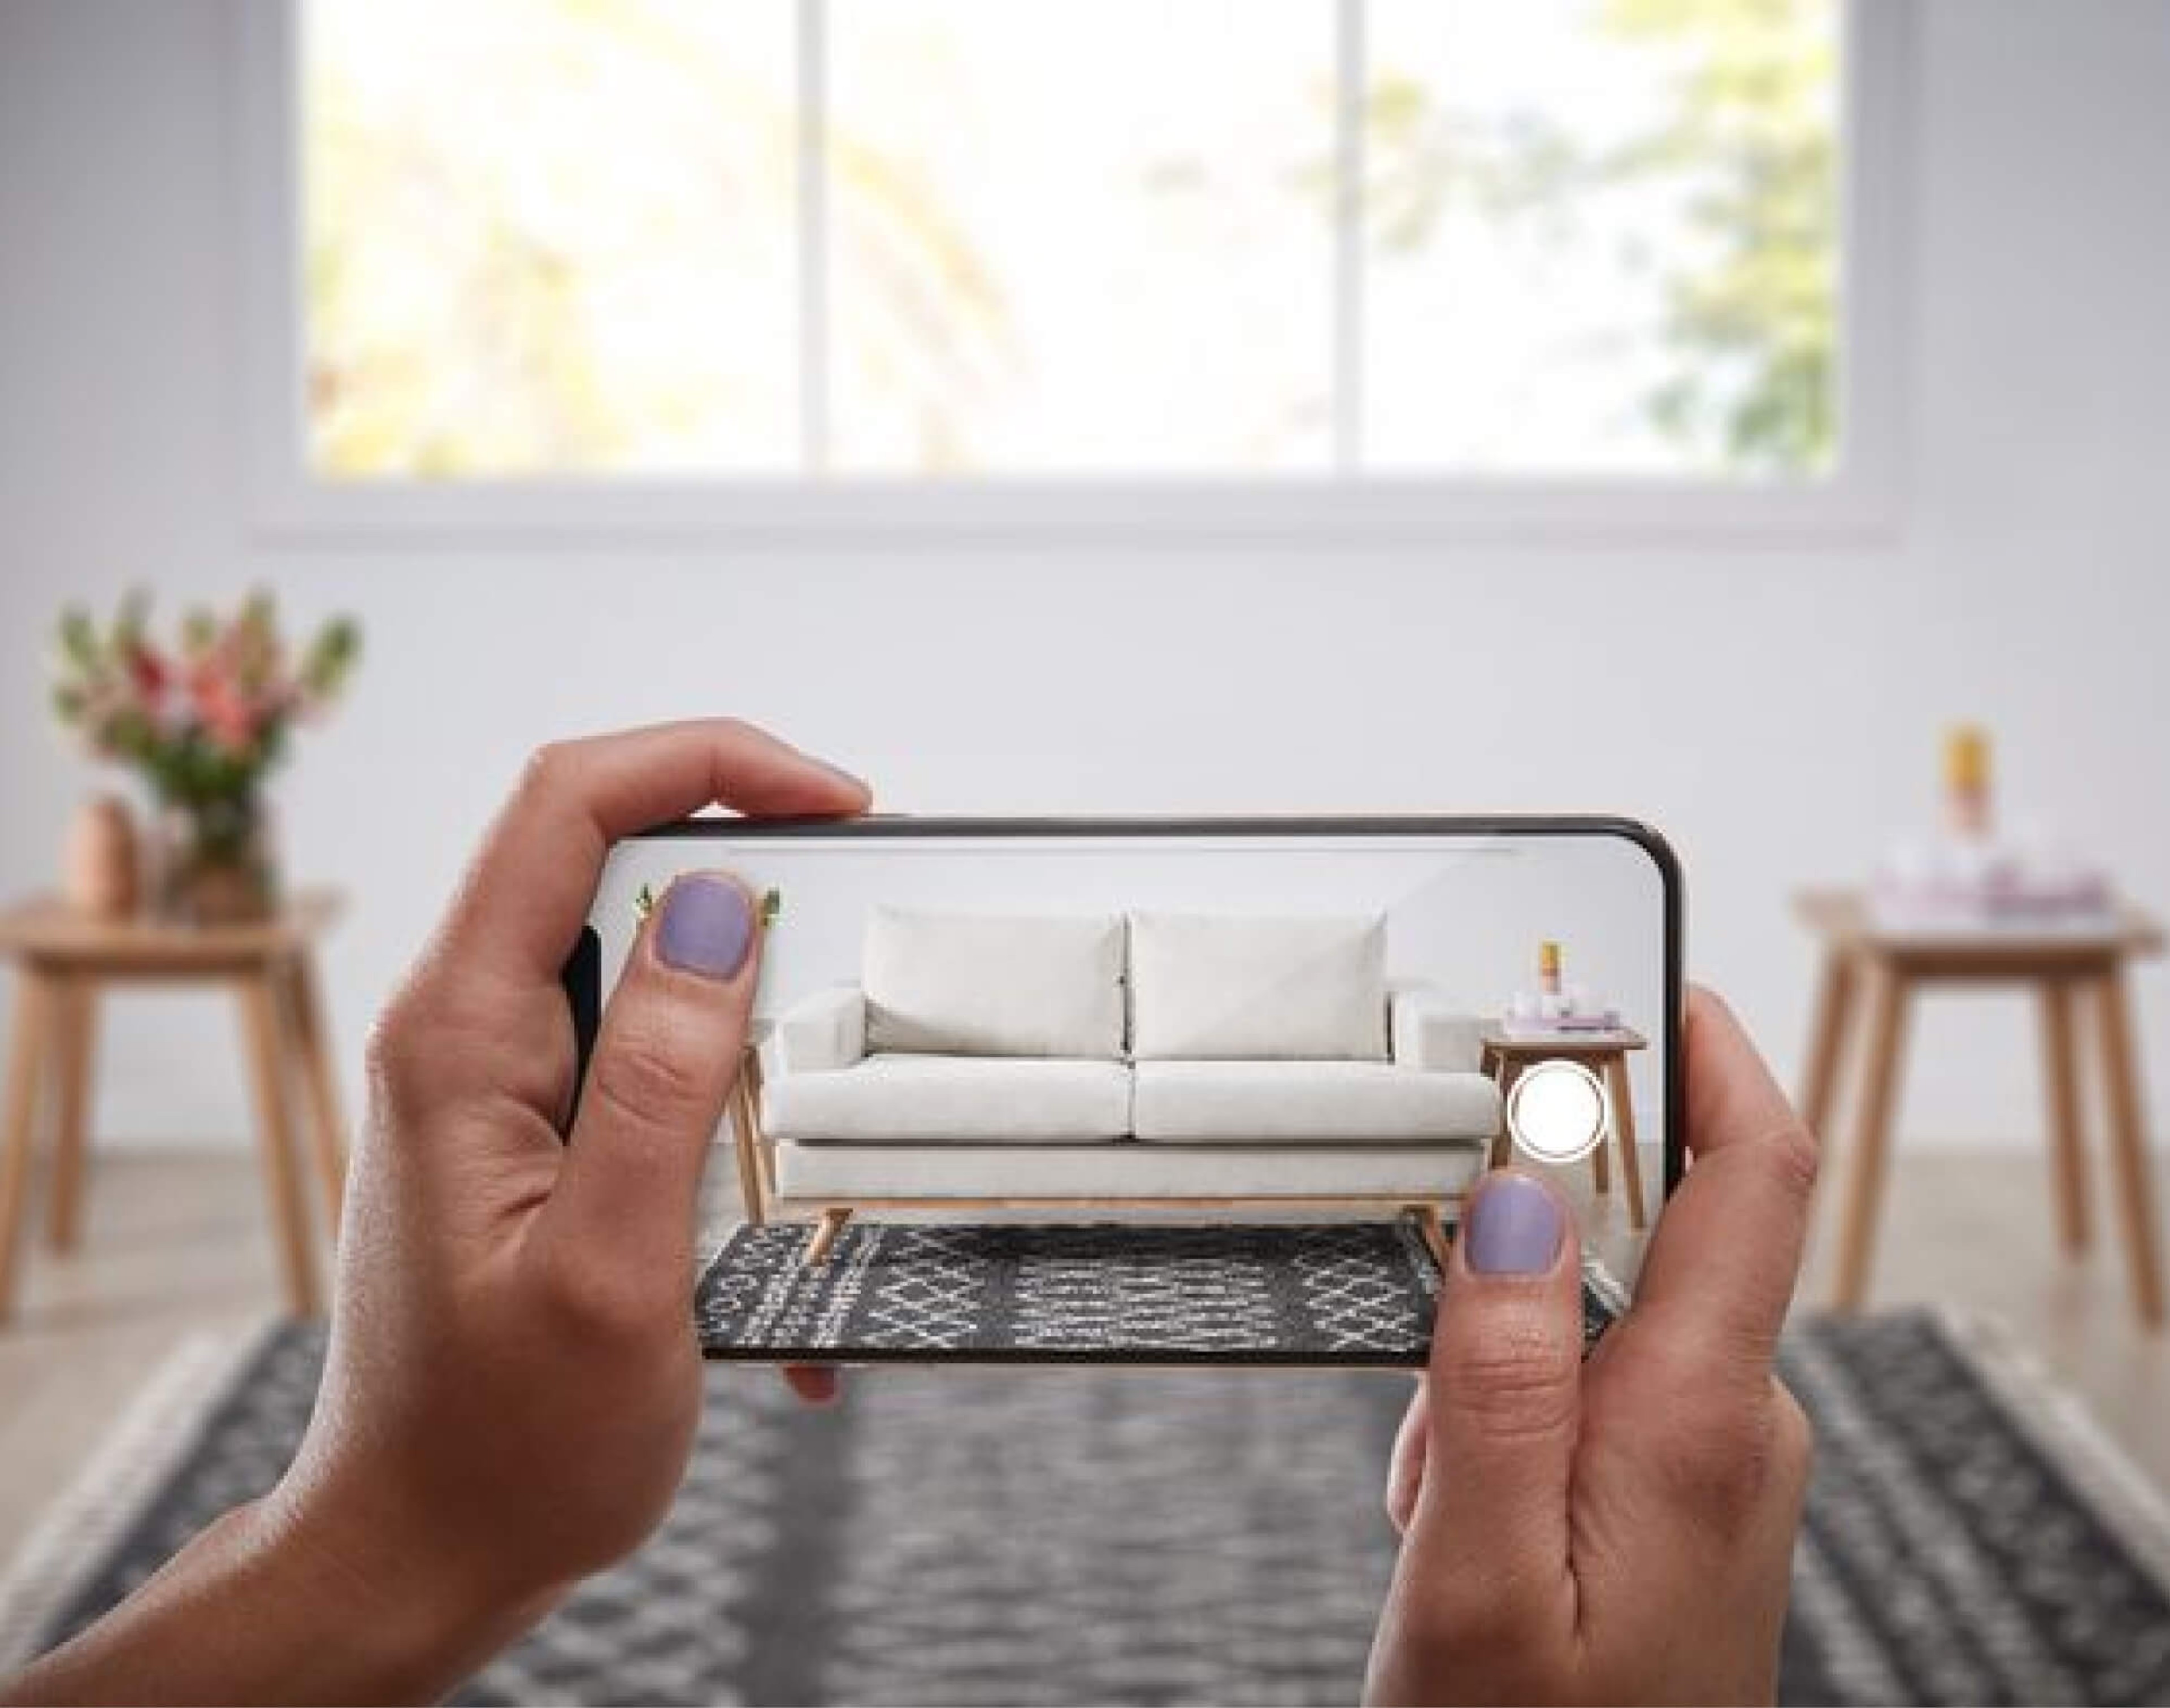 A 3D render of a couch as viewed on a mobile device